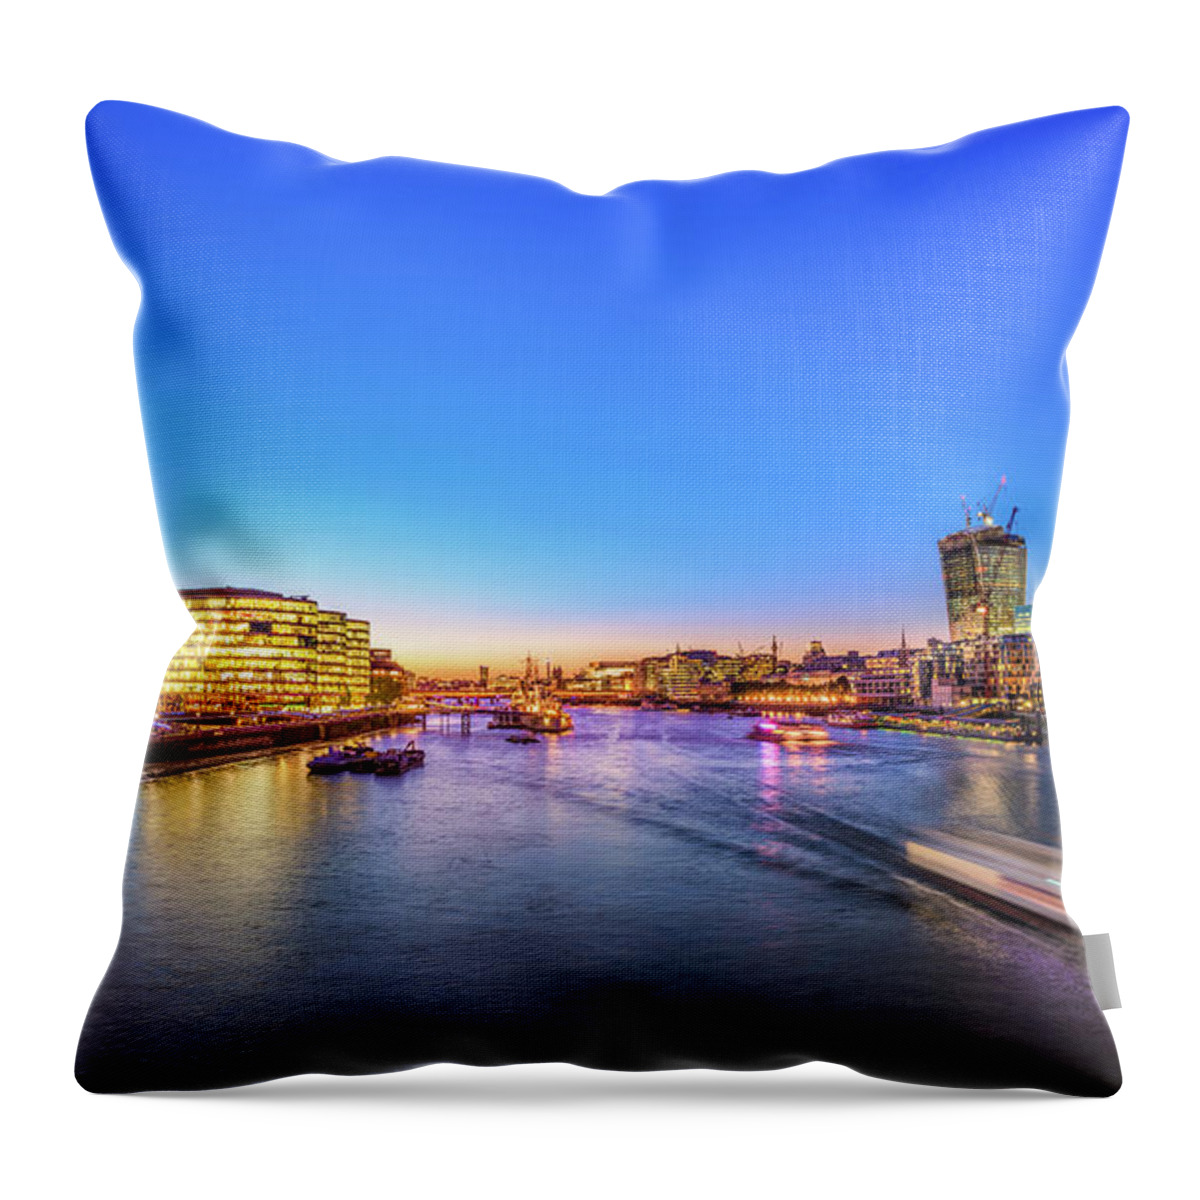 Water's Edge Throw Pillow featuring the photograph London Skyline And River Thames by Juergen Sack